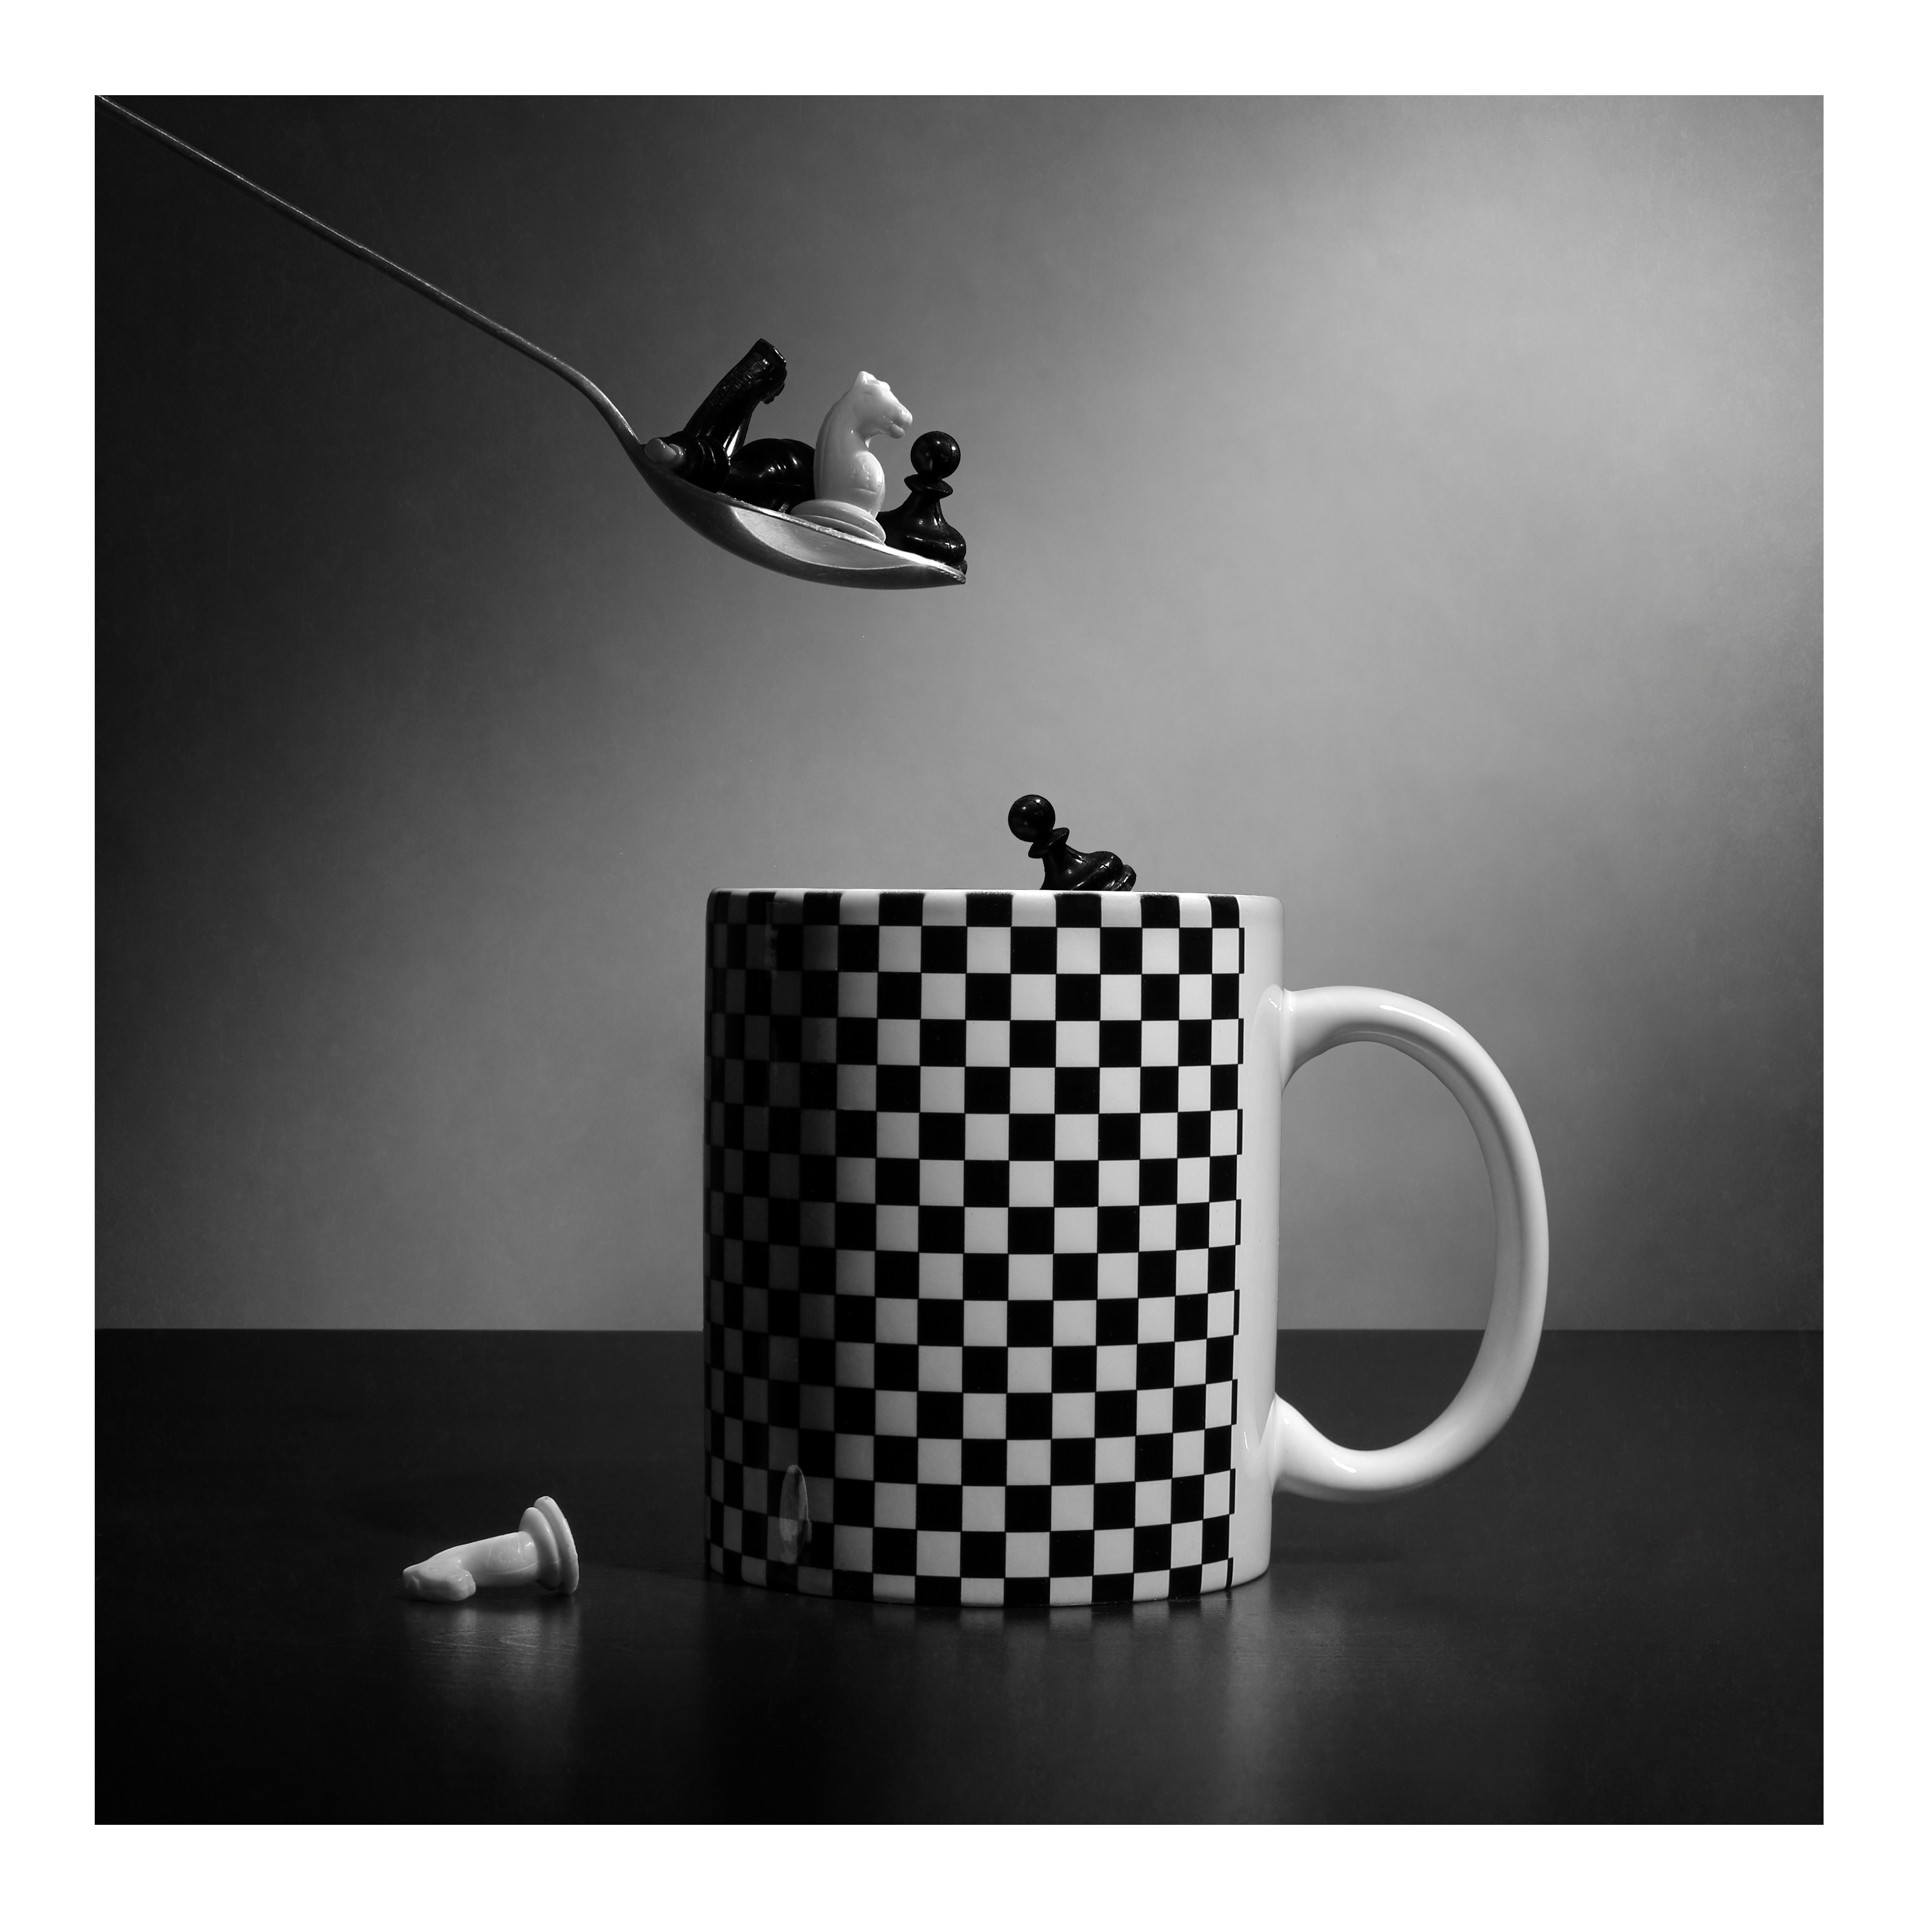 A Cup of Tea for the Chess Player by Victoria Ivanova